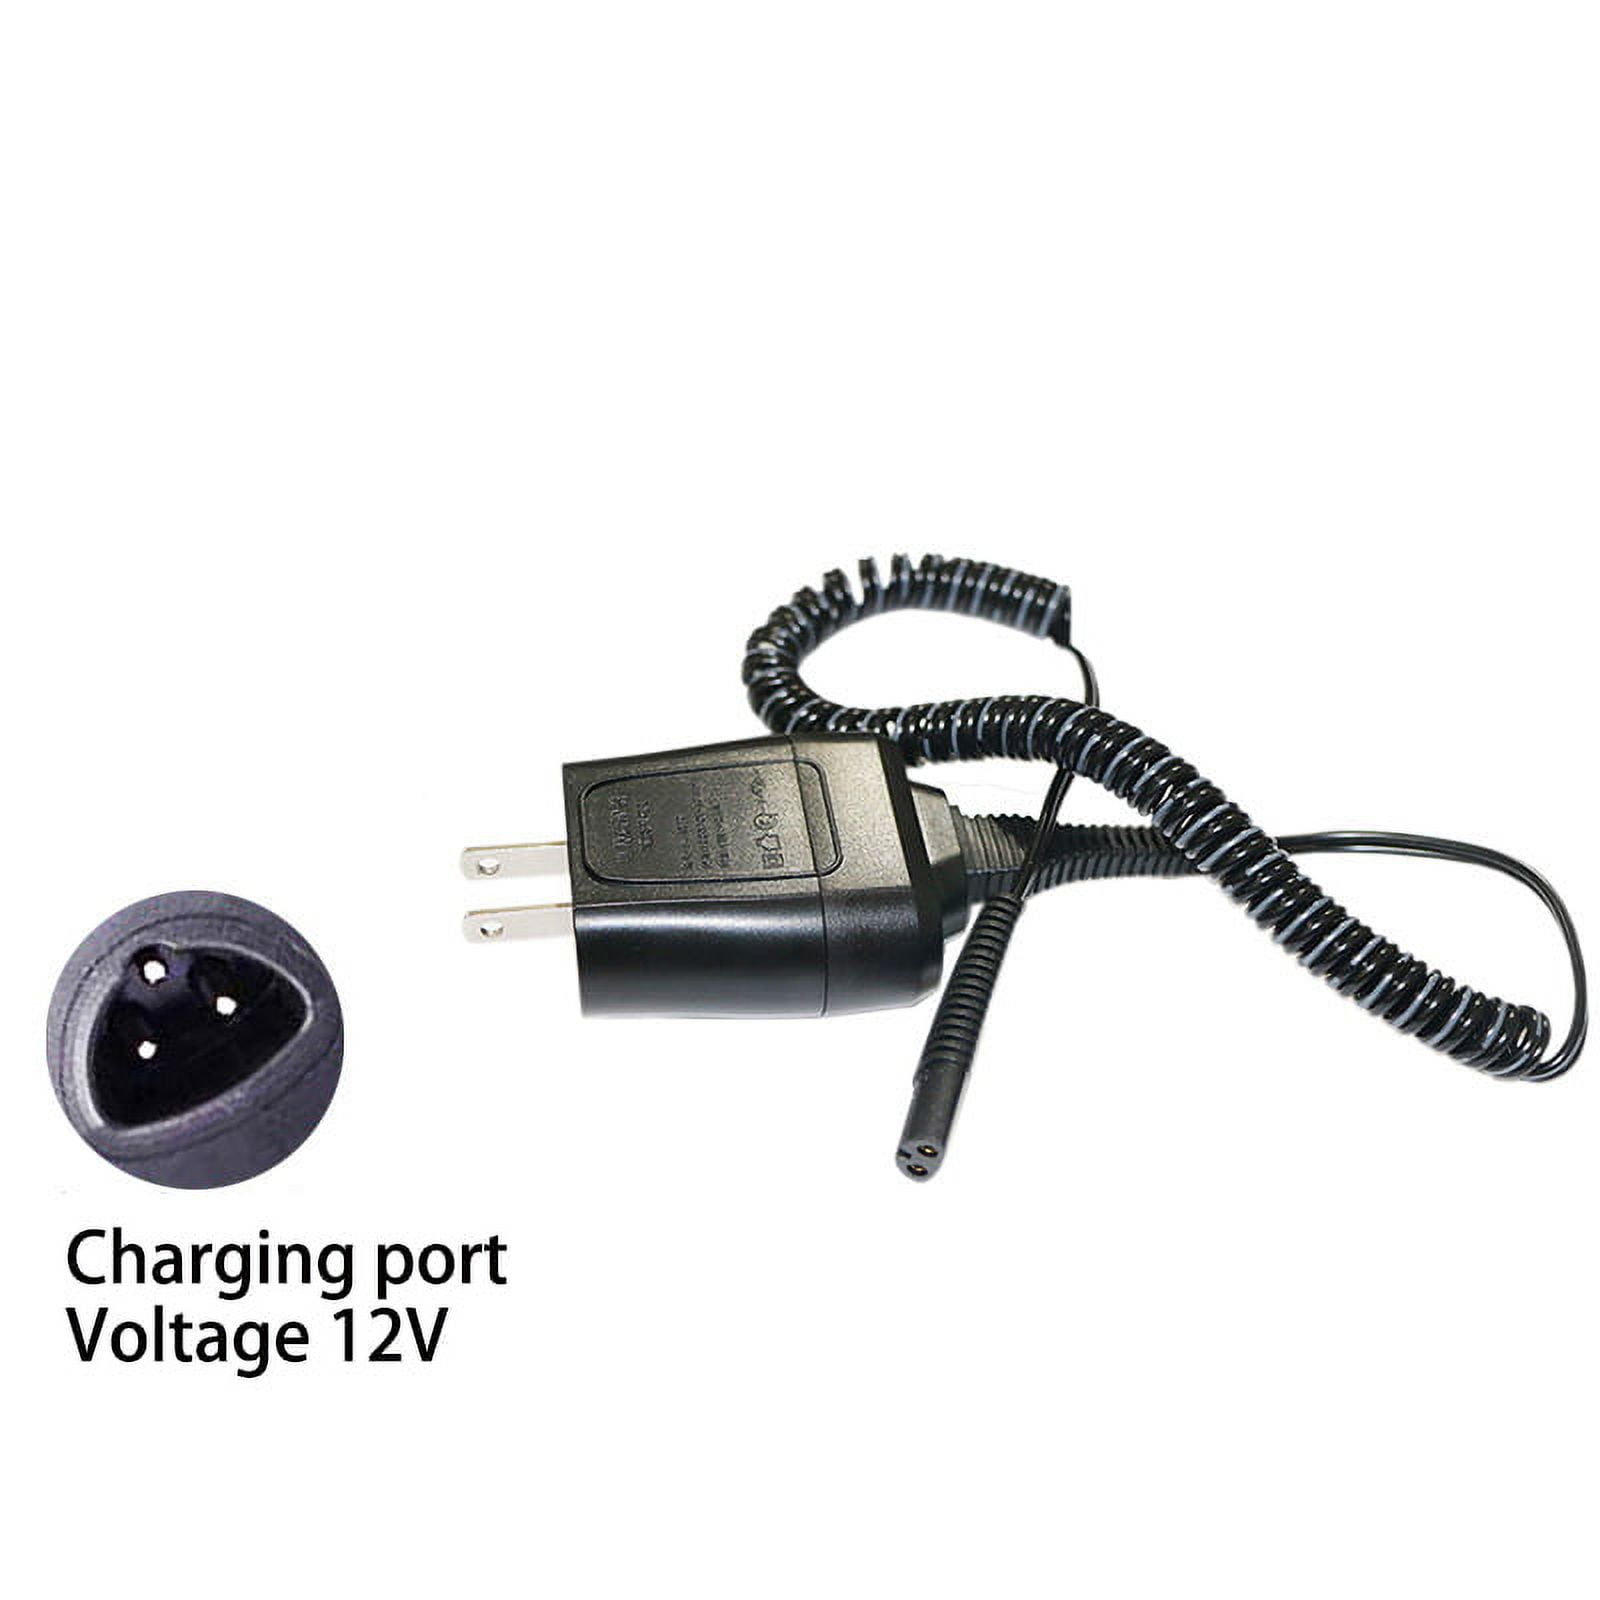  Braun Shaver Charger 12V Power Cord for Braun Series 7 9 3 5 1  XT5 Electric Razor 3040s 340s 9385cc 370 720 760cc 790cc 720s-4 7865cc  9090cc 9330s 5018s 7020s 9095cc